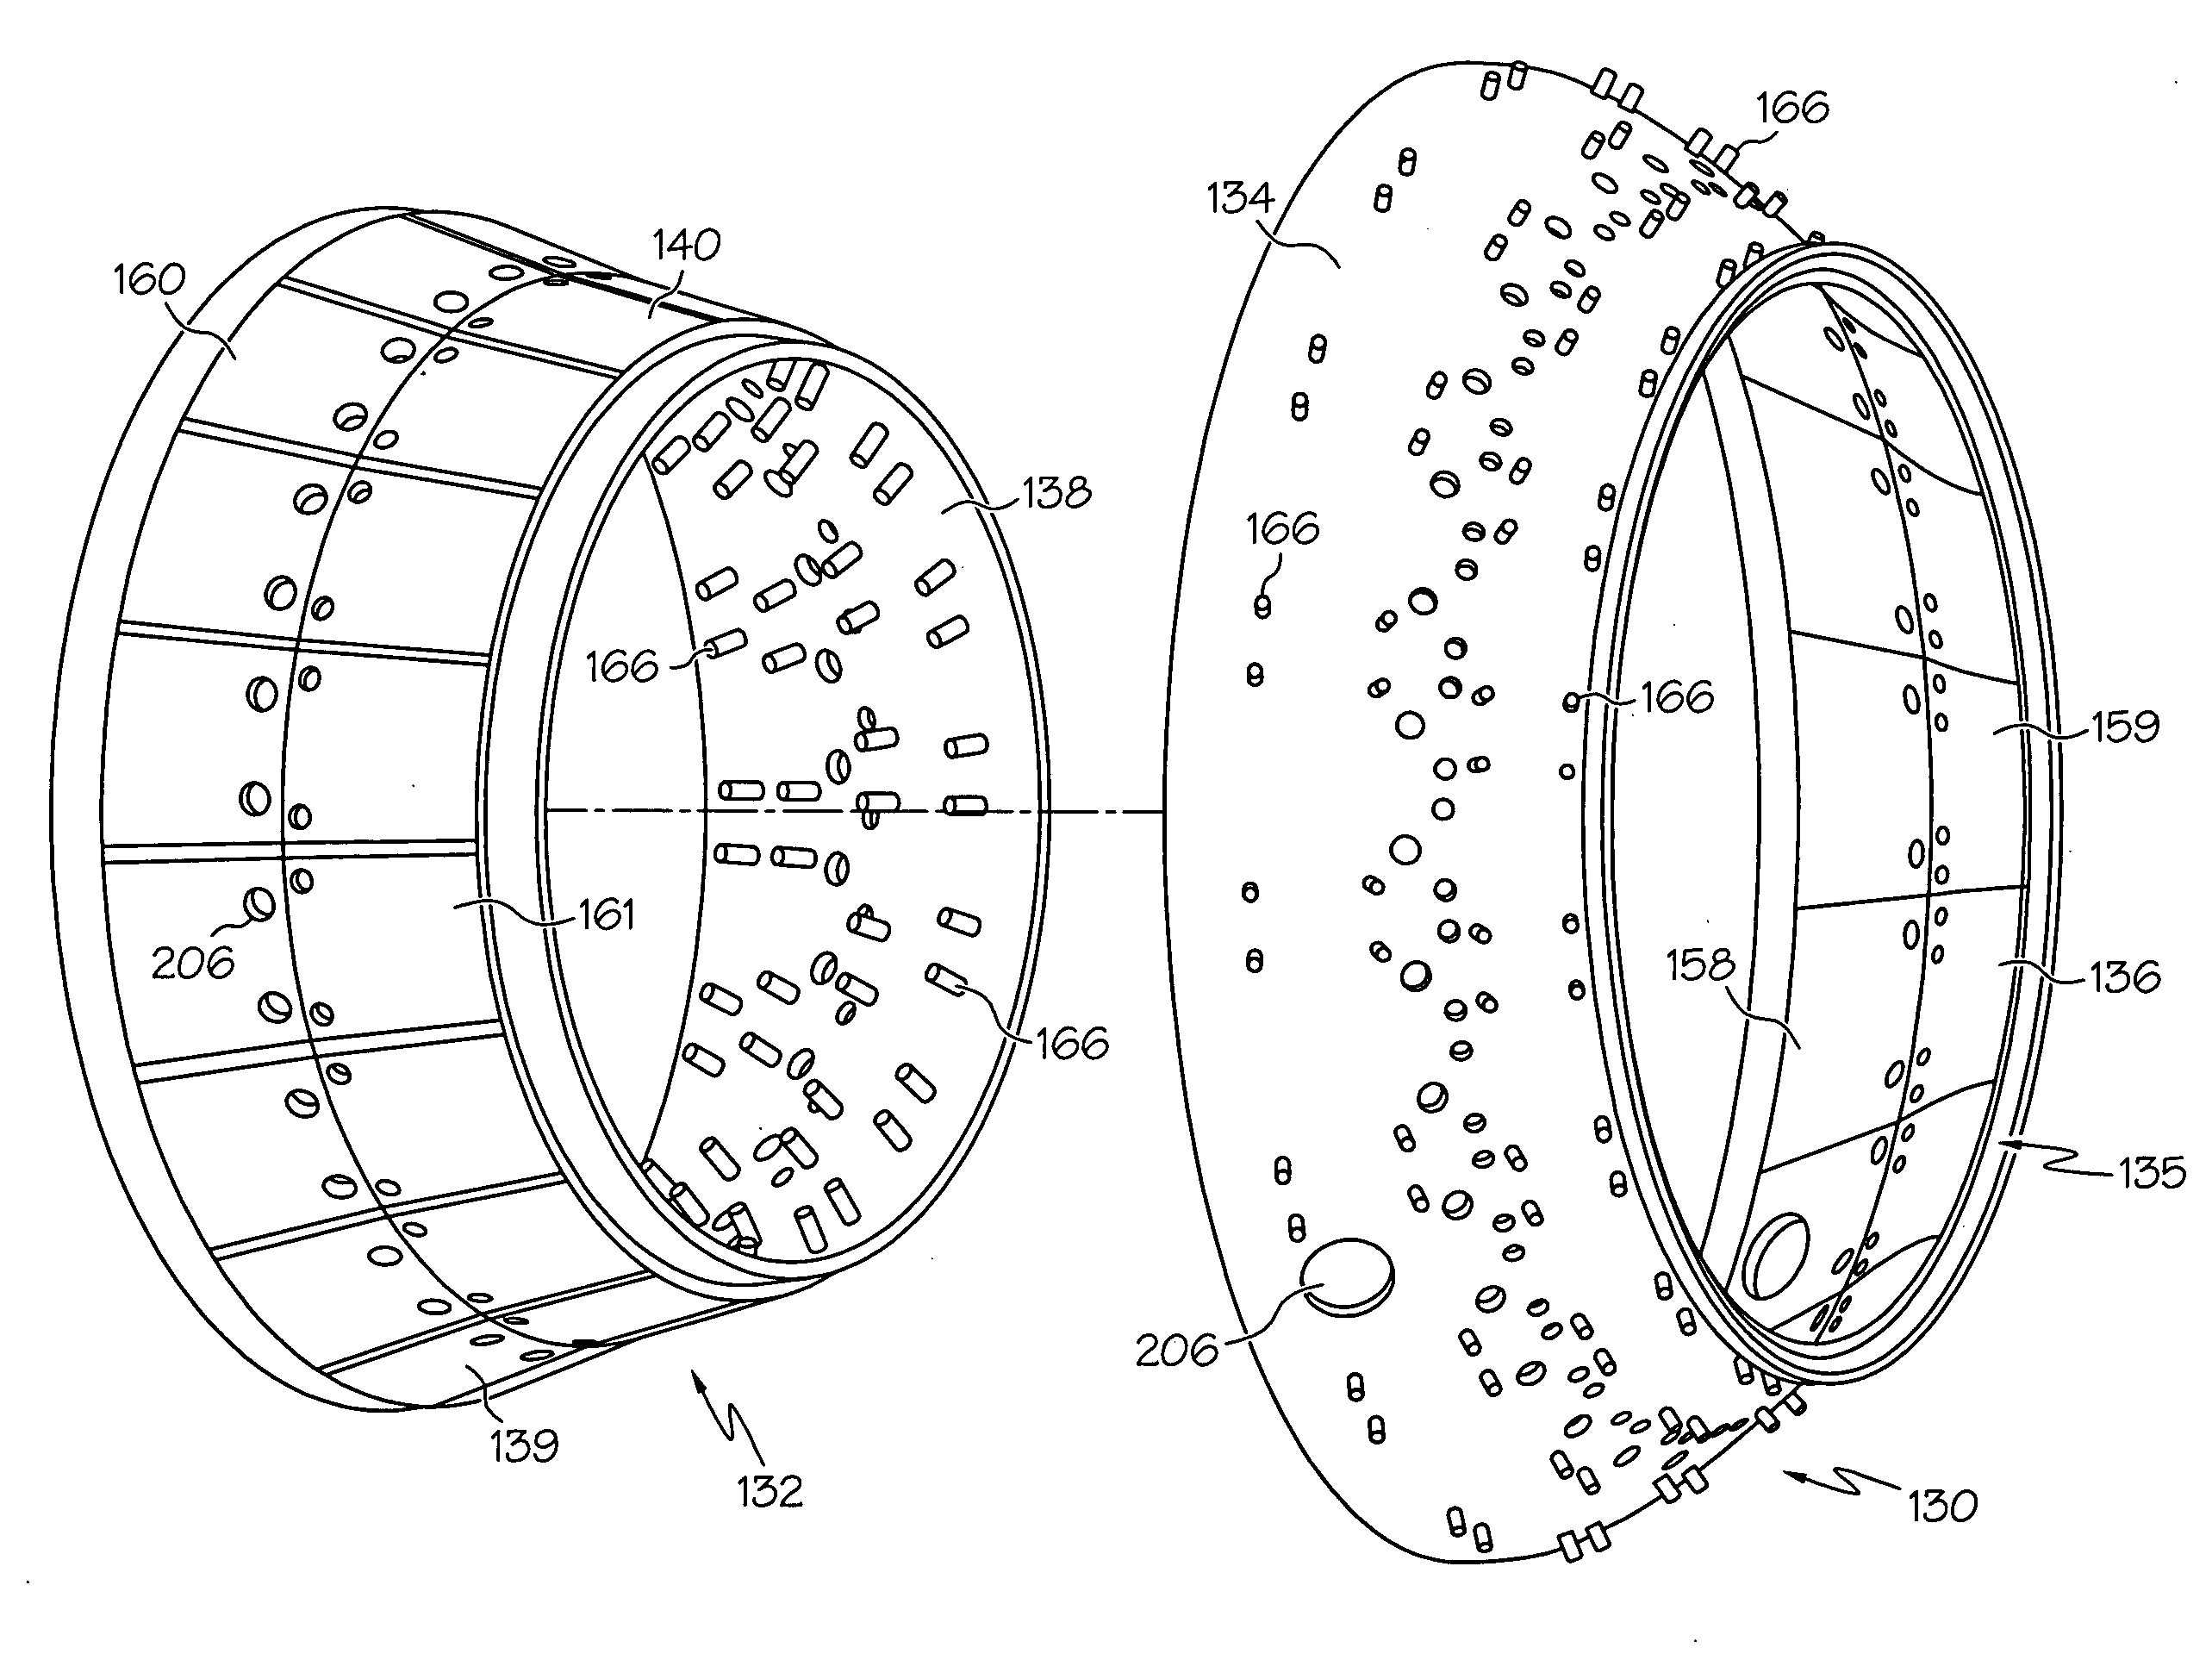 Dual wall structure for use in a combustor of a gas turbine engine